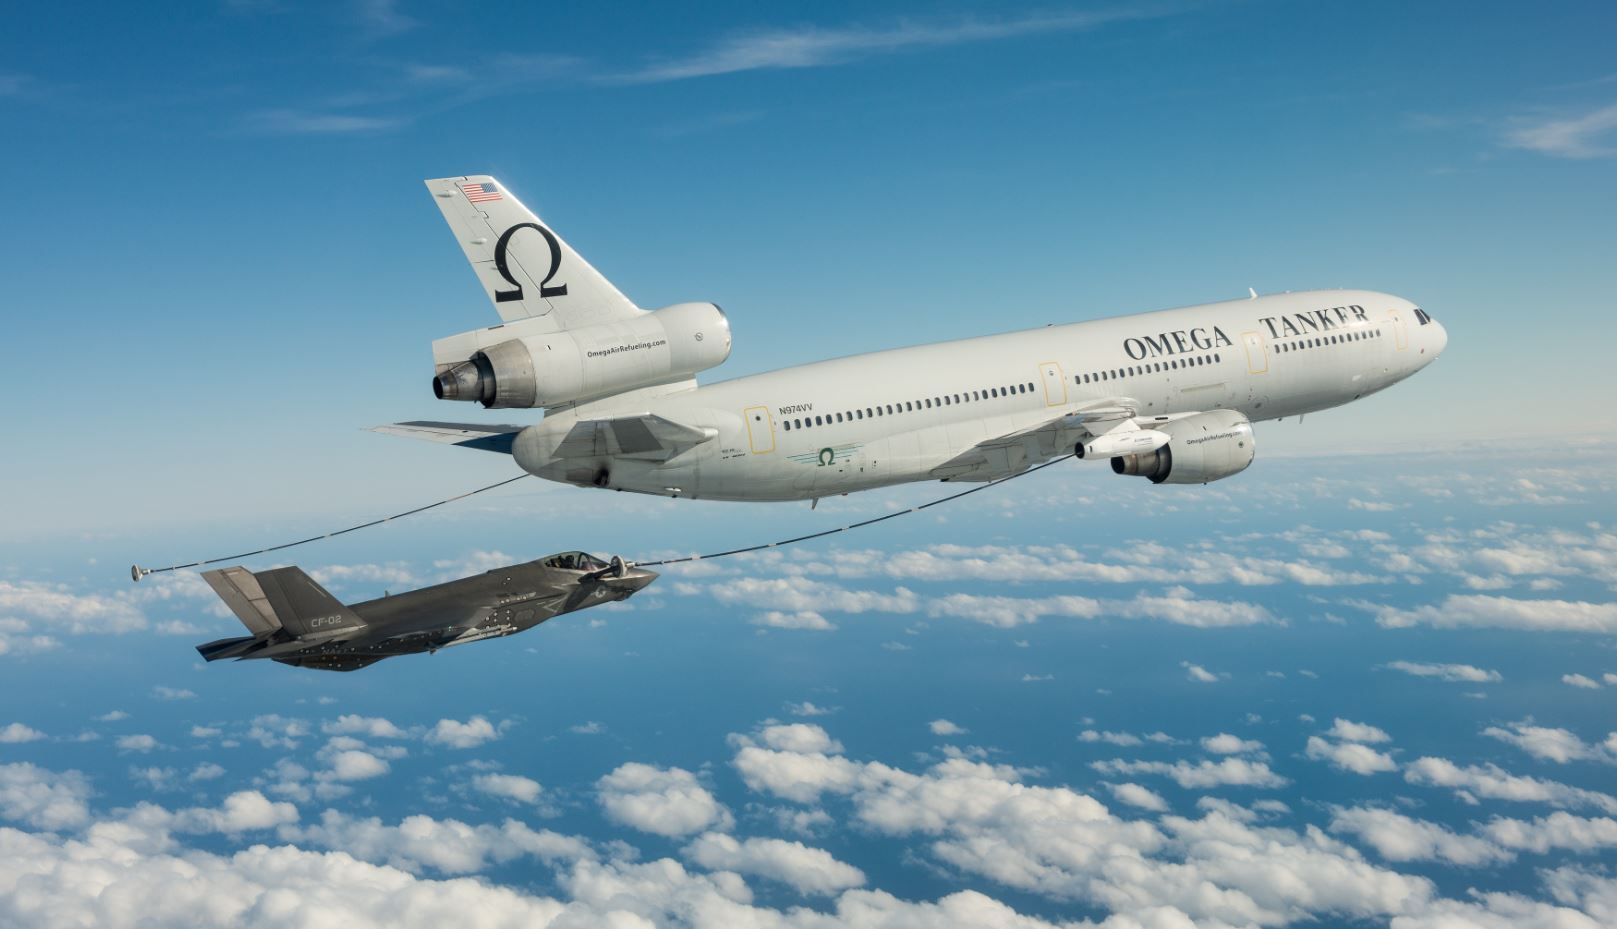 Omega Aerial Refueling Services is now providing aerial refueling services to both the F-35B and F-35C Lightening II aircraft. 